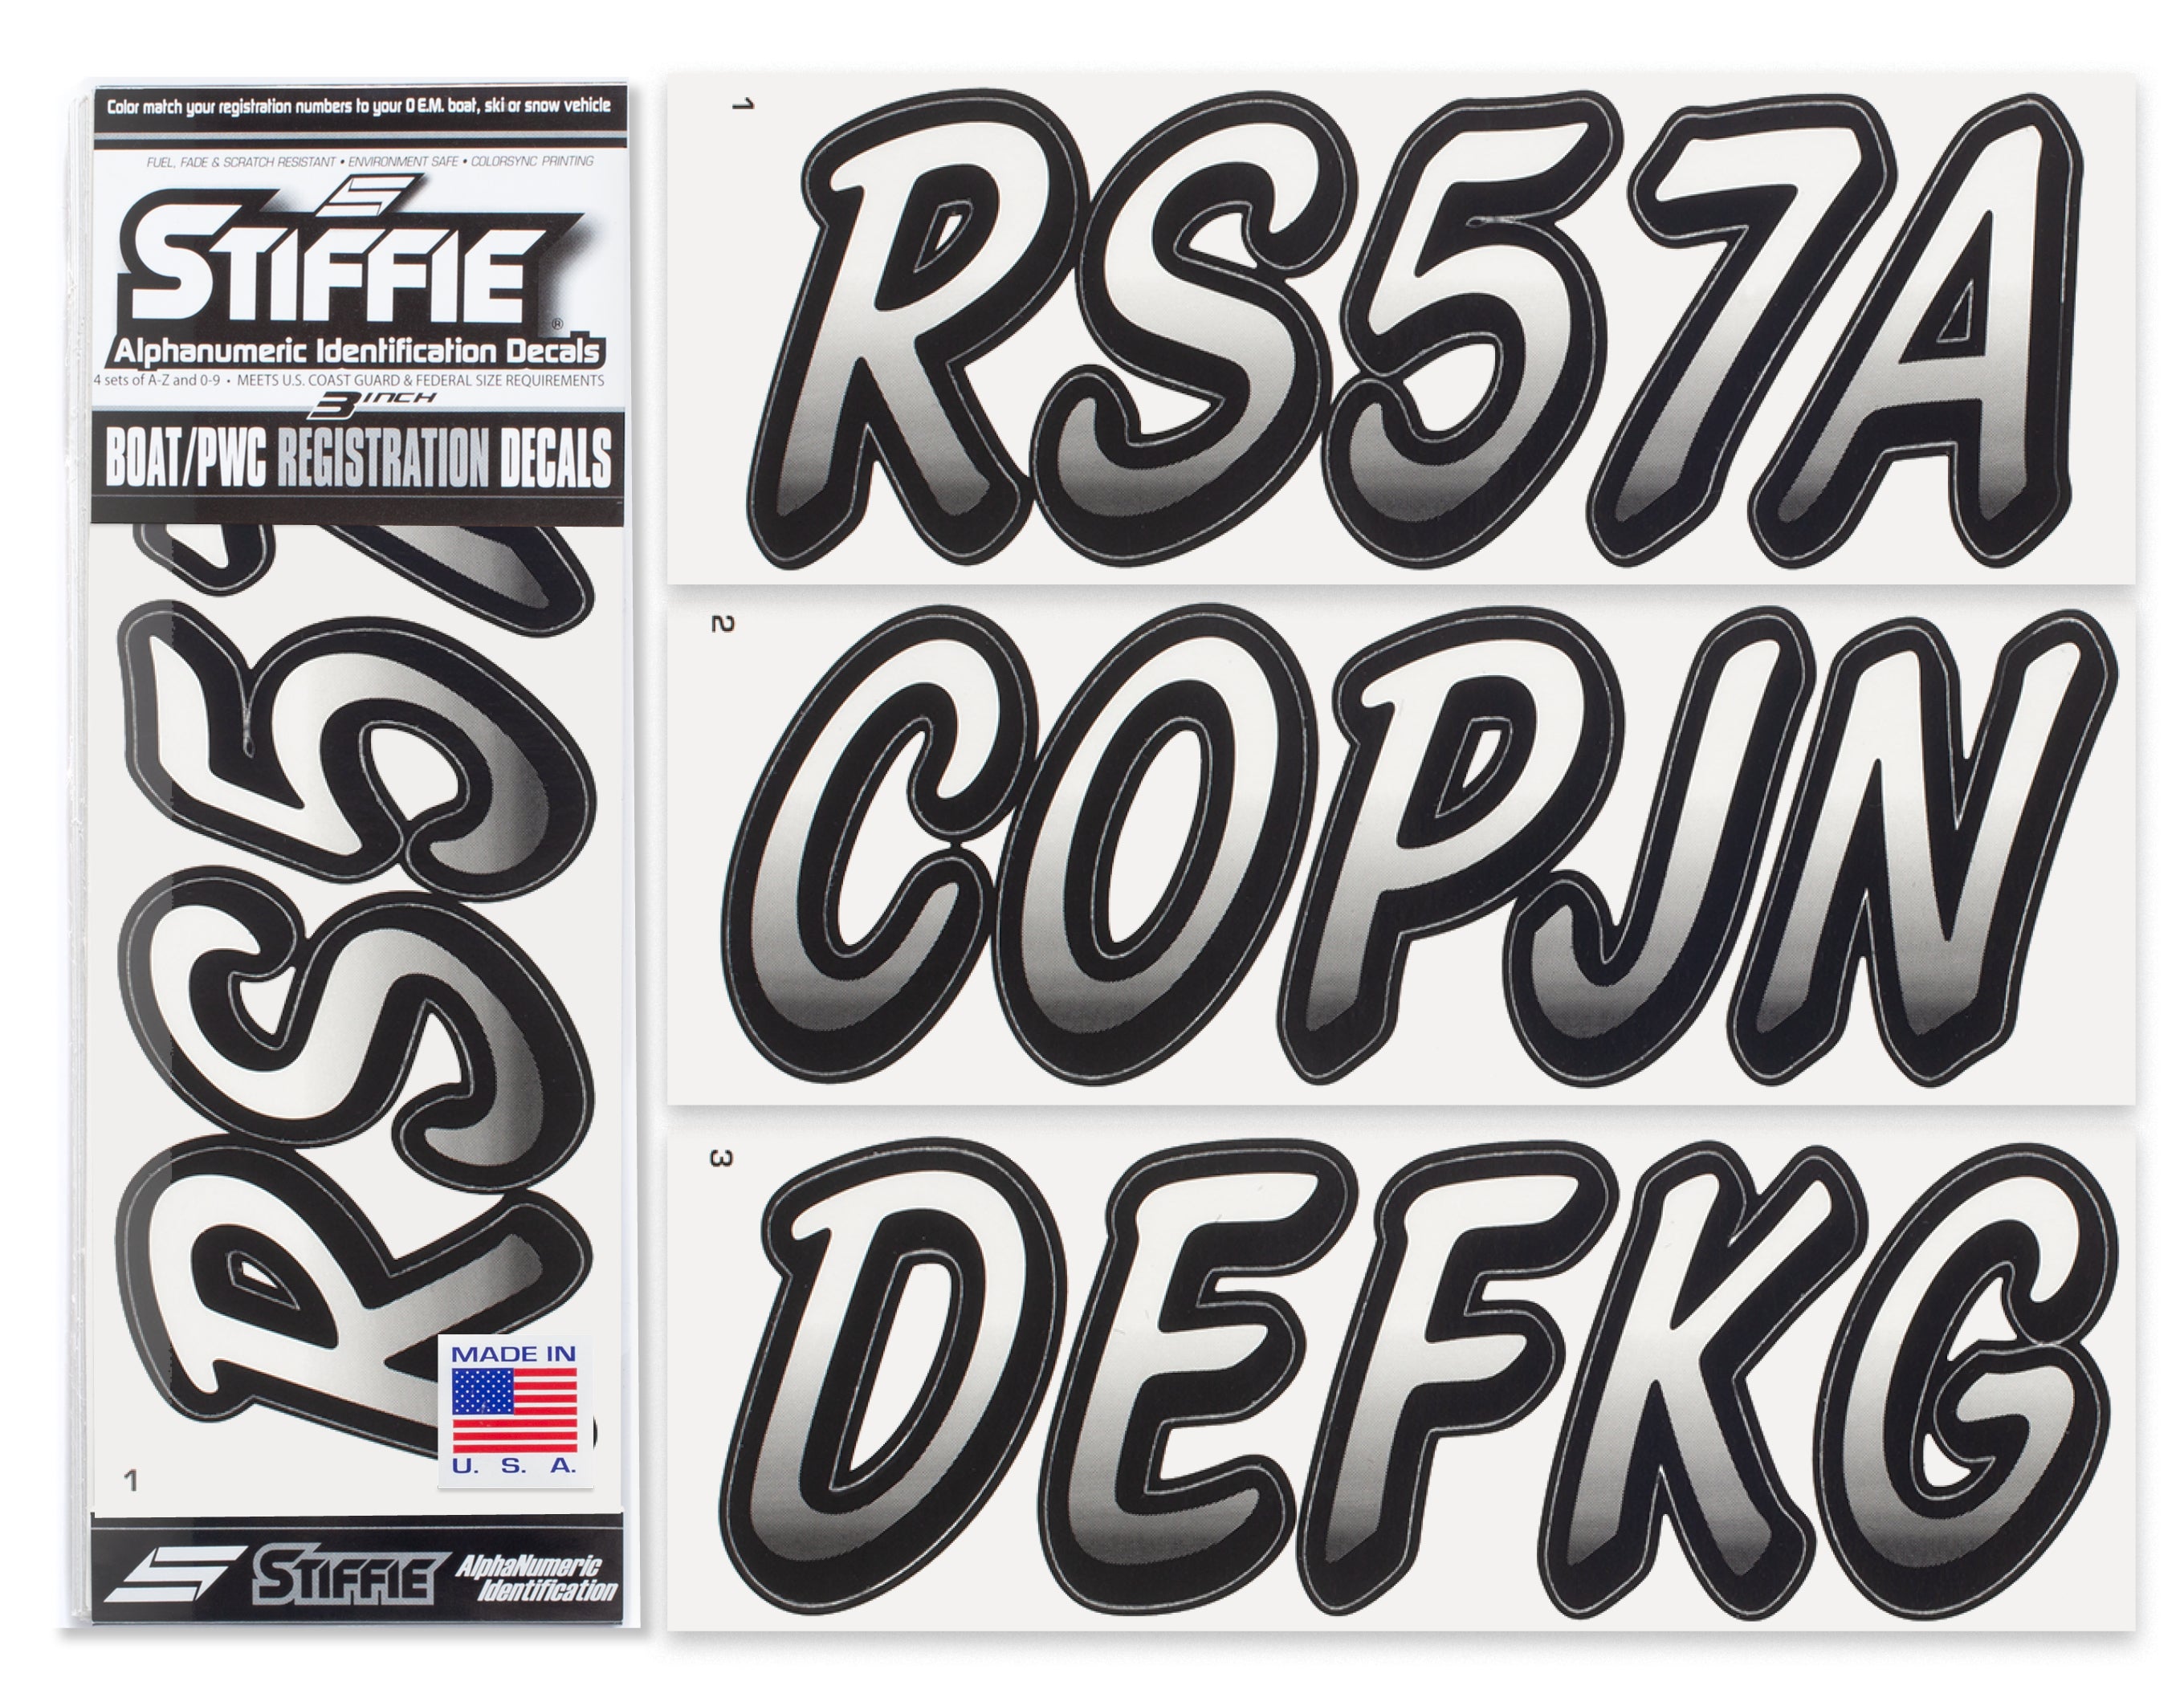 STIFFIE Whipline Transparent/Black 3" Alpha-Numeric Registration Identification Numbers Stickers Decals for Boats & Personal Watercraft